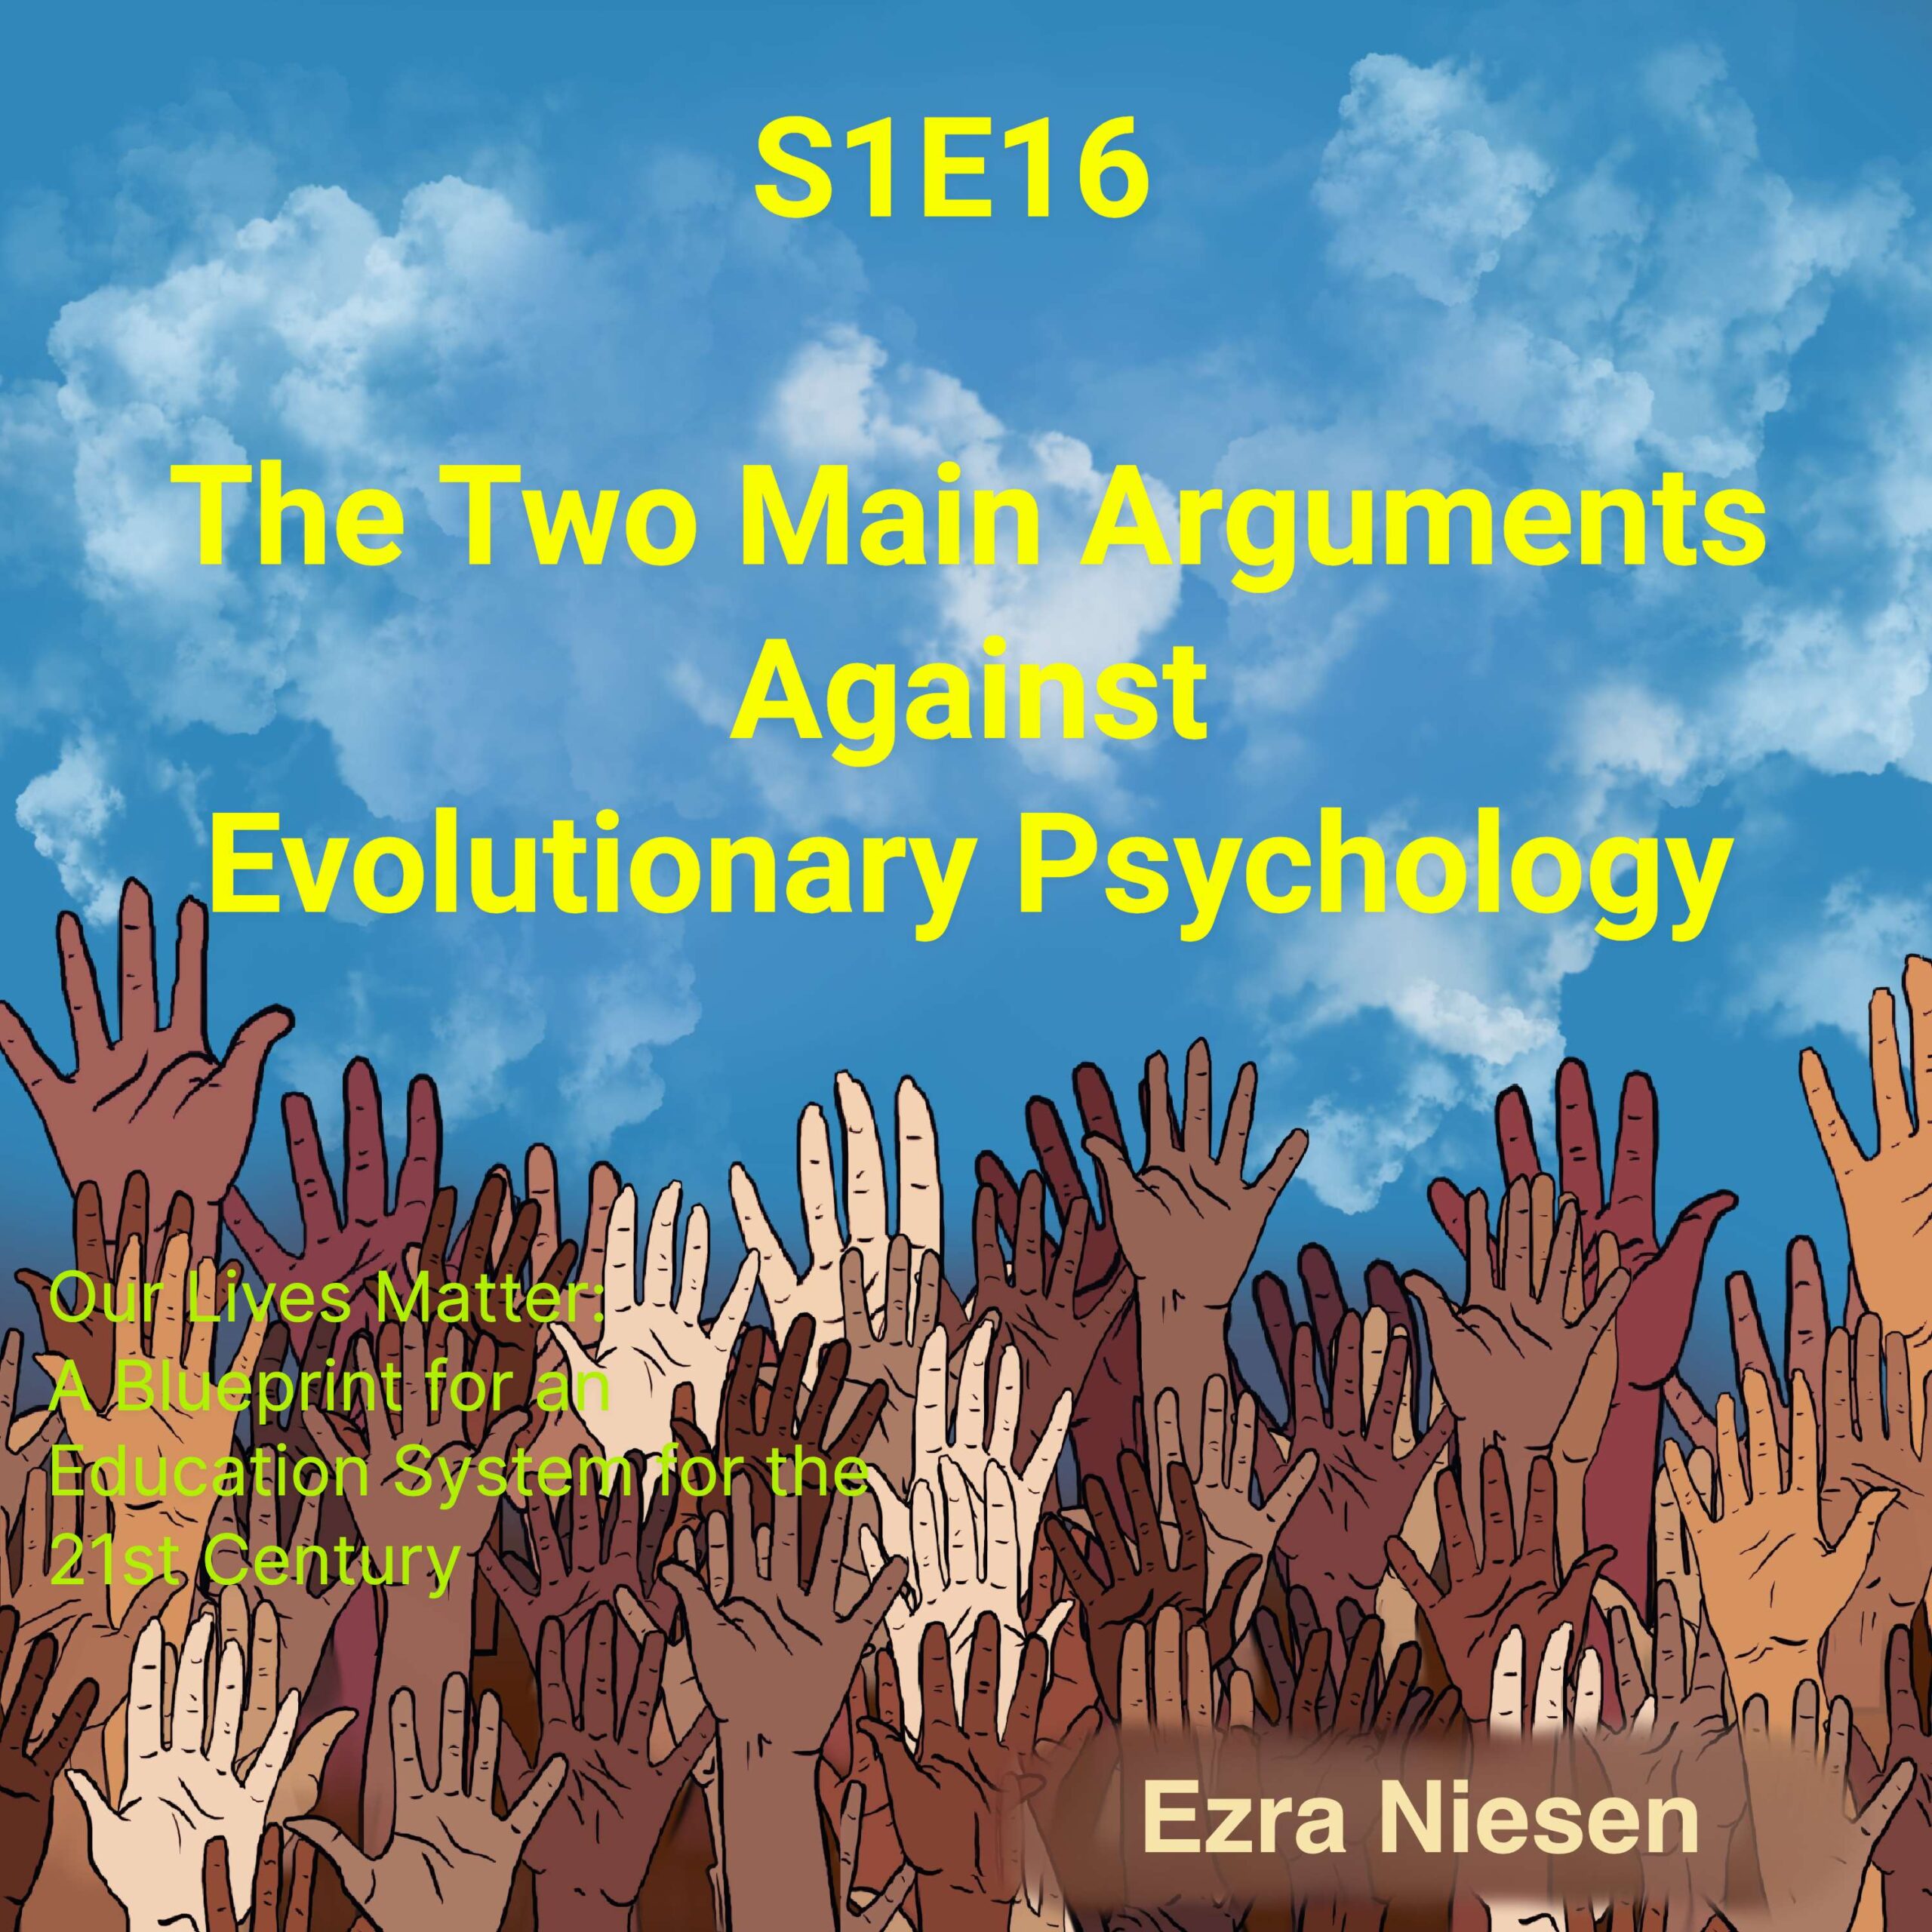 Our Lives Matter S1E16:  The Two Main Arguments Against Evolutionary Psychology